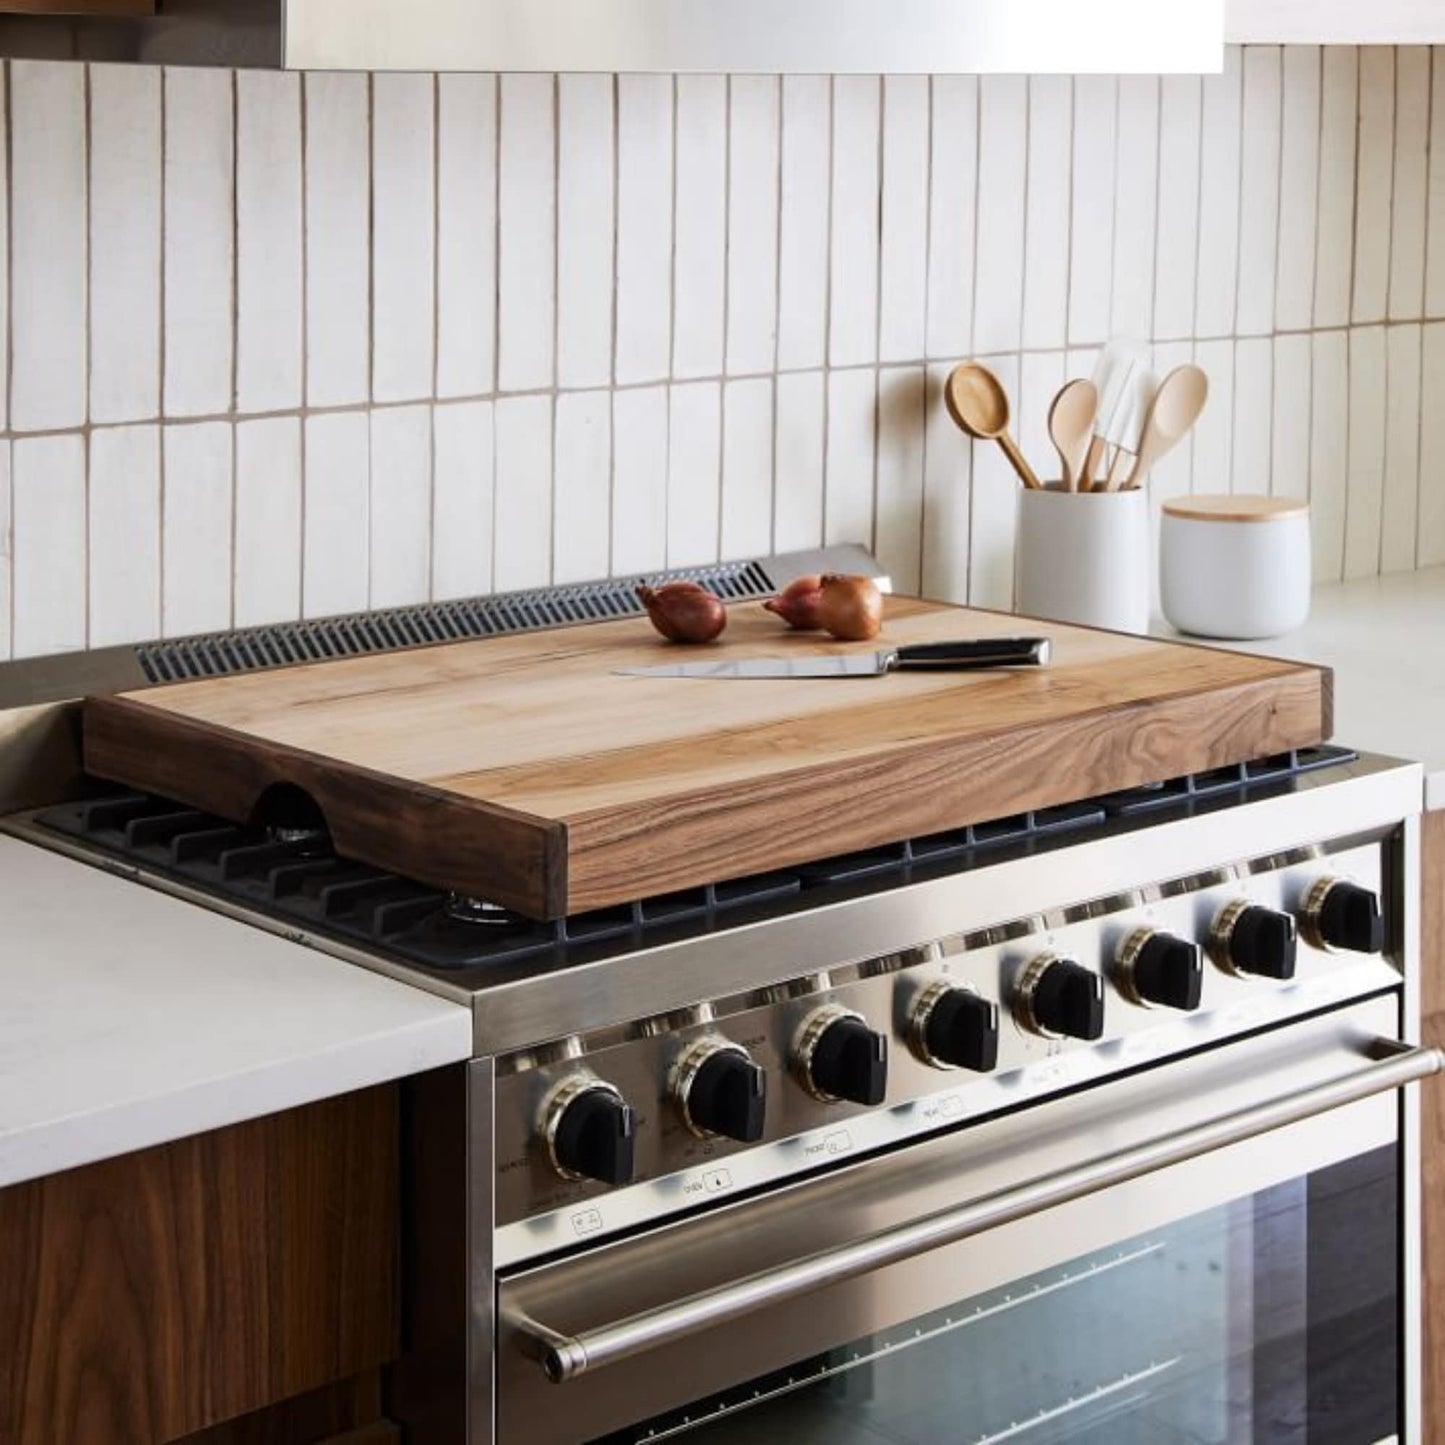 Ashland Stove Top Cover| Wood Handmade  Noodle Board | Cutting Board Cooktop Burner Cover